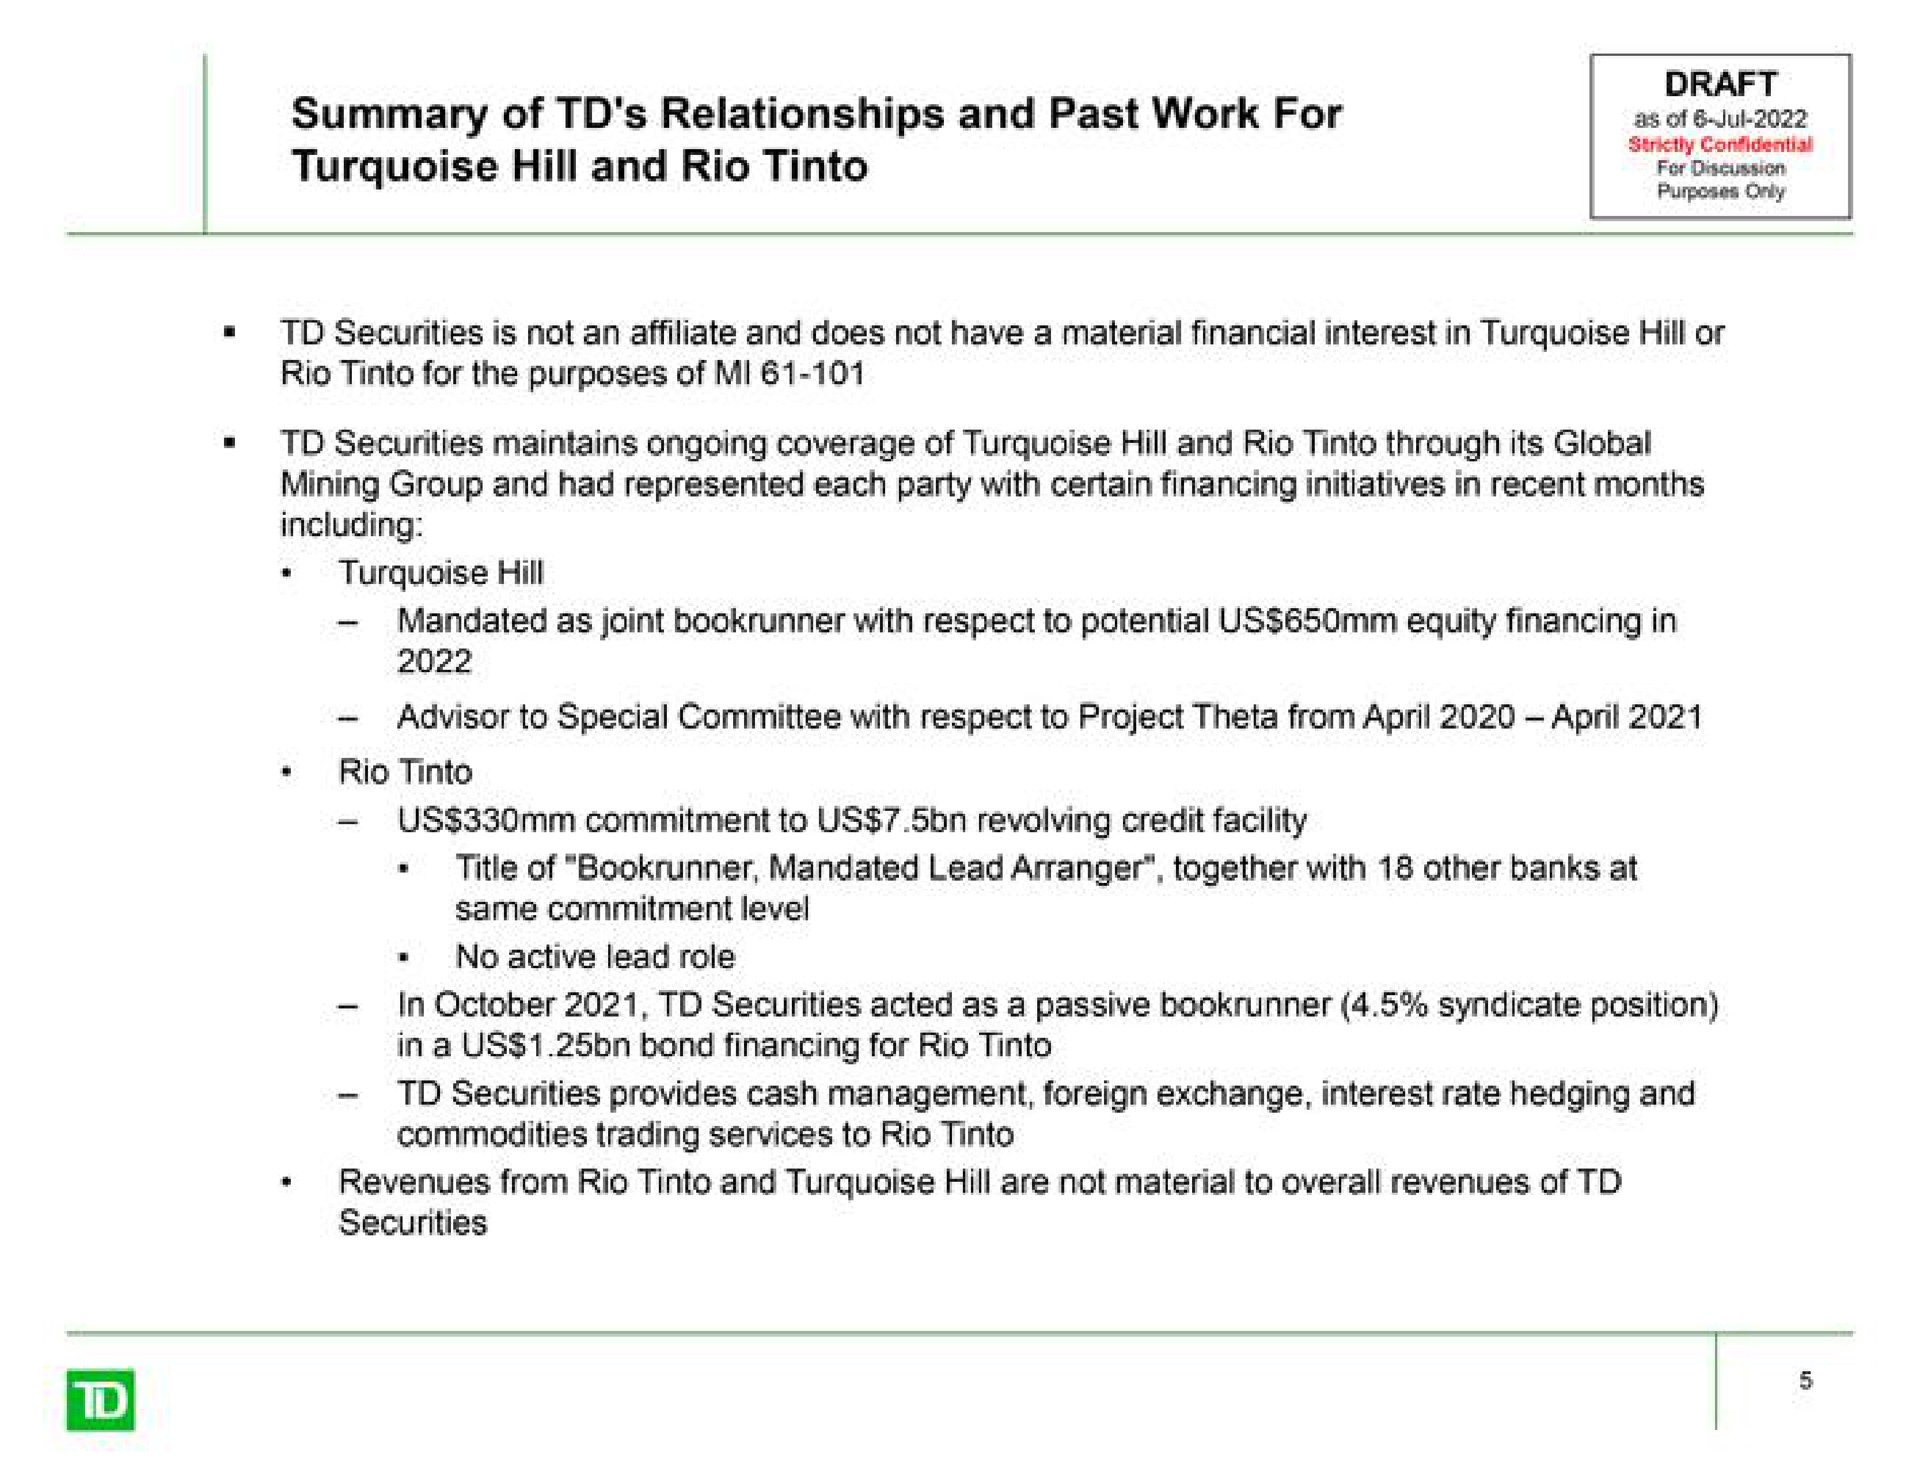 summary of relationships and past work for turquoise hill and rio a of rio for the purposes of securities maintains ongoing coverage of turquoise hill and rio through its global mandated as joint with respect to potential us equity financing in advisor to special committee with respect to project theta from rio us commitment to us revolving credit facility same commitment level in securities acted as a passive syndicate position in a us bond financing for rio securities provides cash management foreign exchange interest rate hedging and commodities trading services to rio | TD Securities